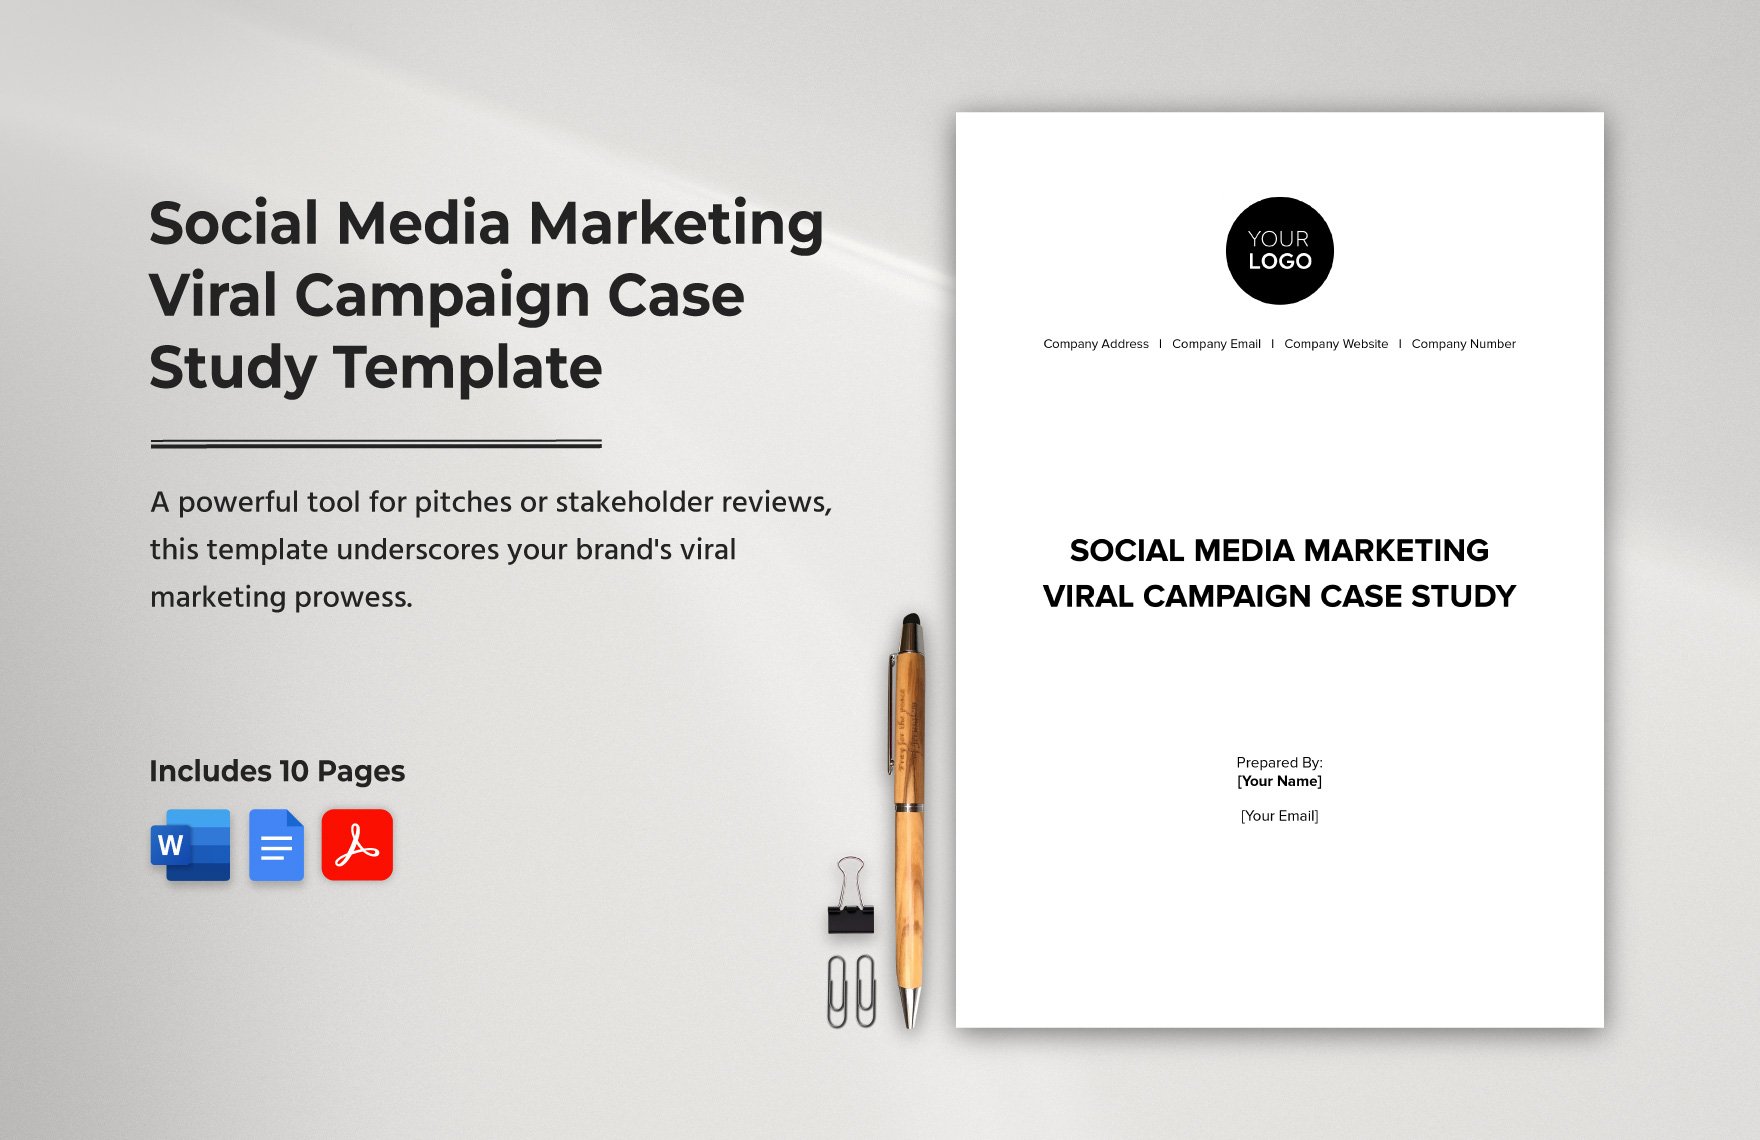 Social Media Marketing Viral Campaign Case Study Template